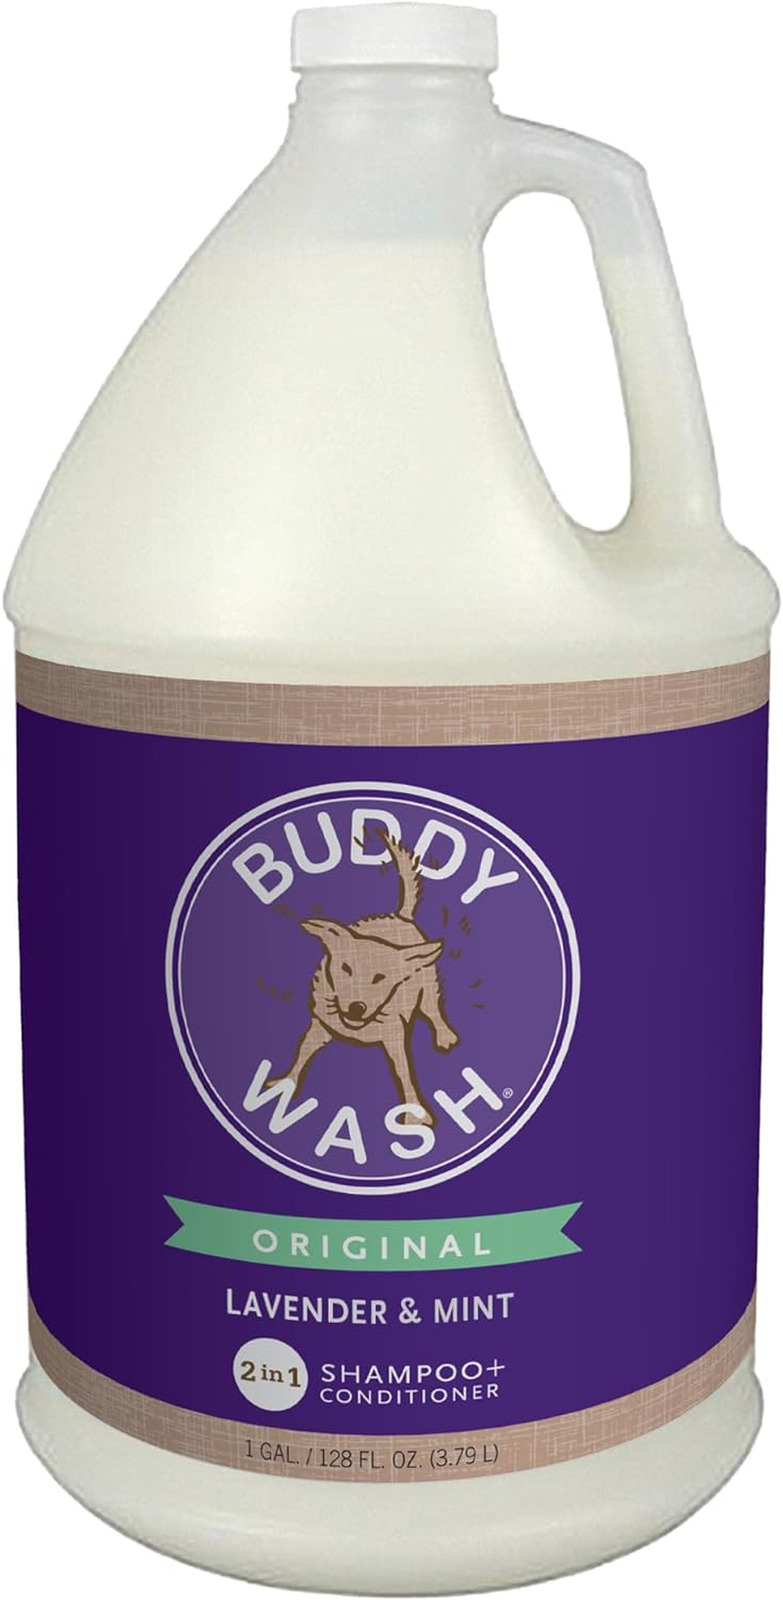 Buddy Wash 2-In-1 Dog Shampoo and Conditioner for Dog Grooming, Lavender & Mint,